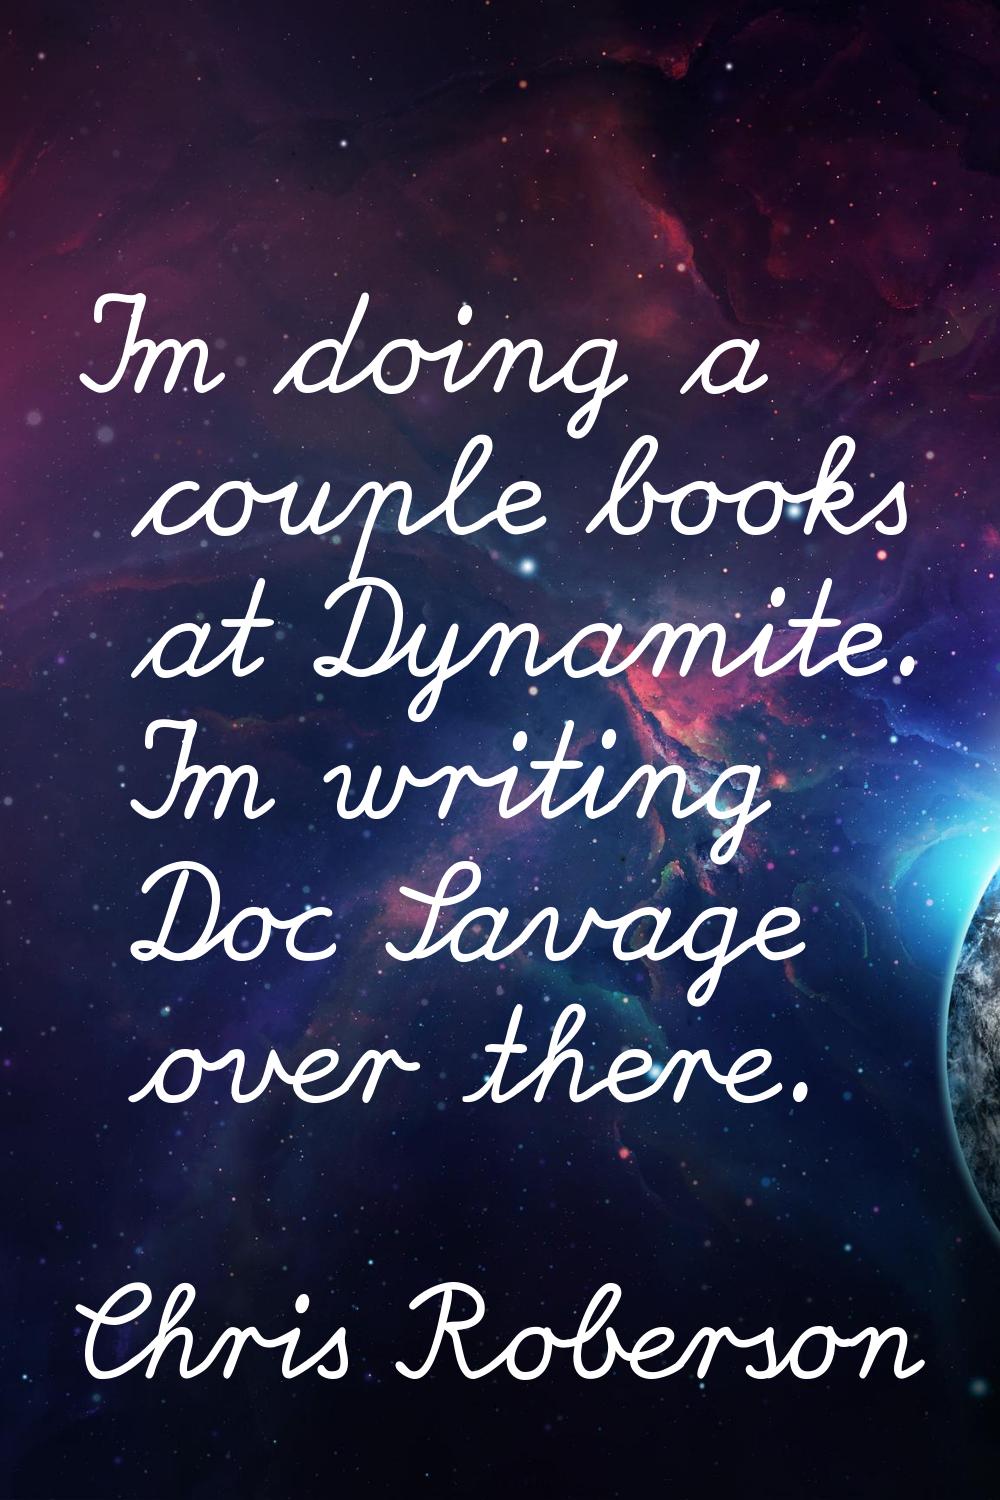 I'm doing a couple books at Dynamite. I'm writing Doc Savage over there.